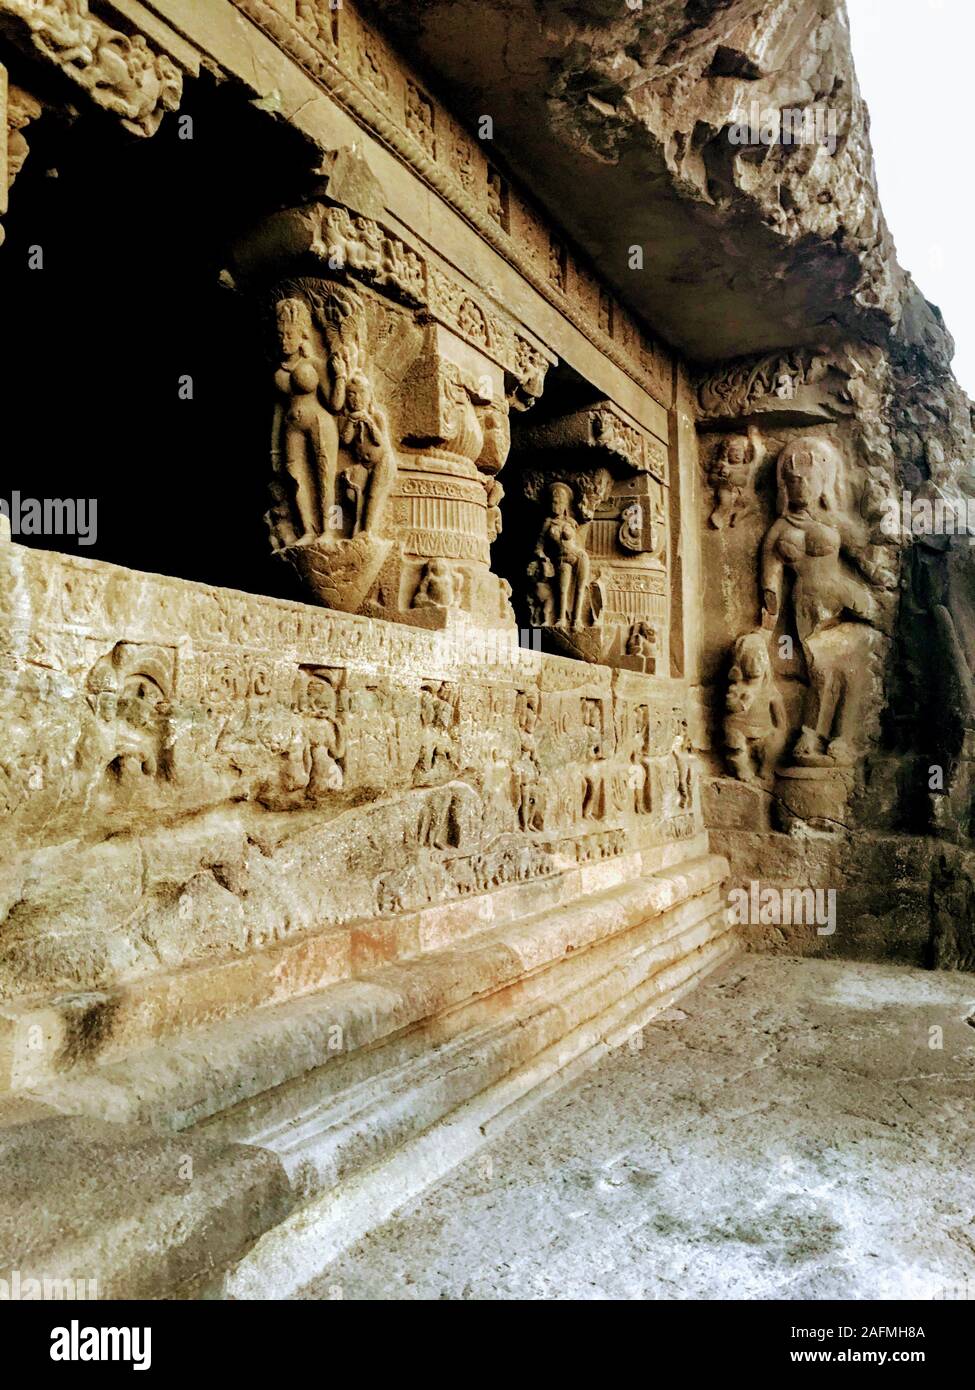 Ajanta Caves are 30 rock-cut Buddhist cave monuments from the 2nd century BCE to about 480 CE in the Aurangabad district of Maharashtra state of India. Stock Photo